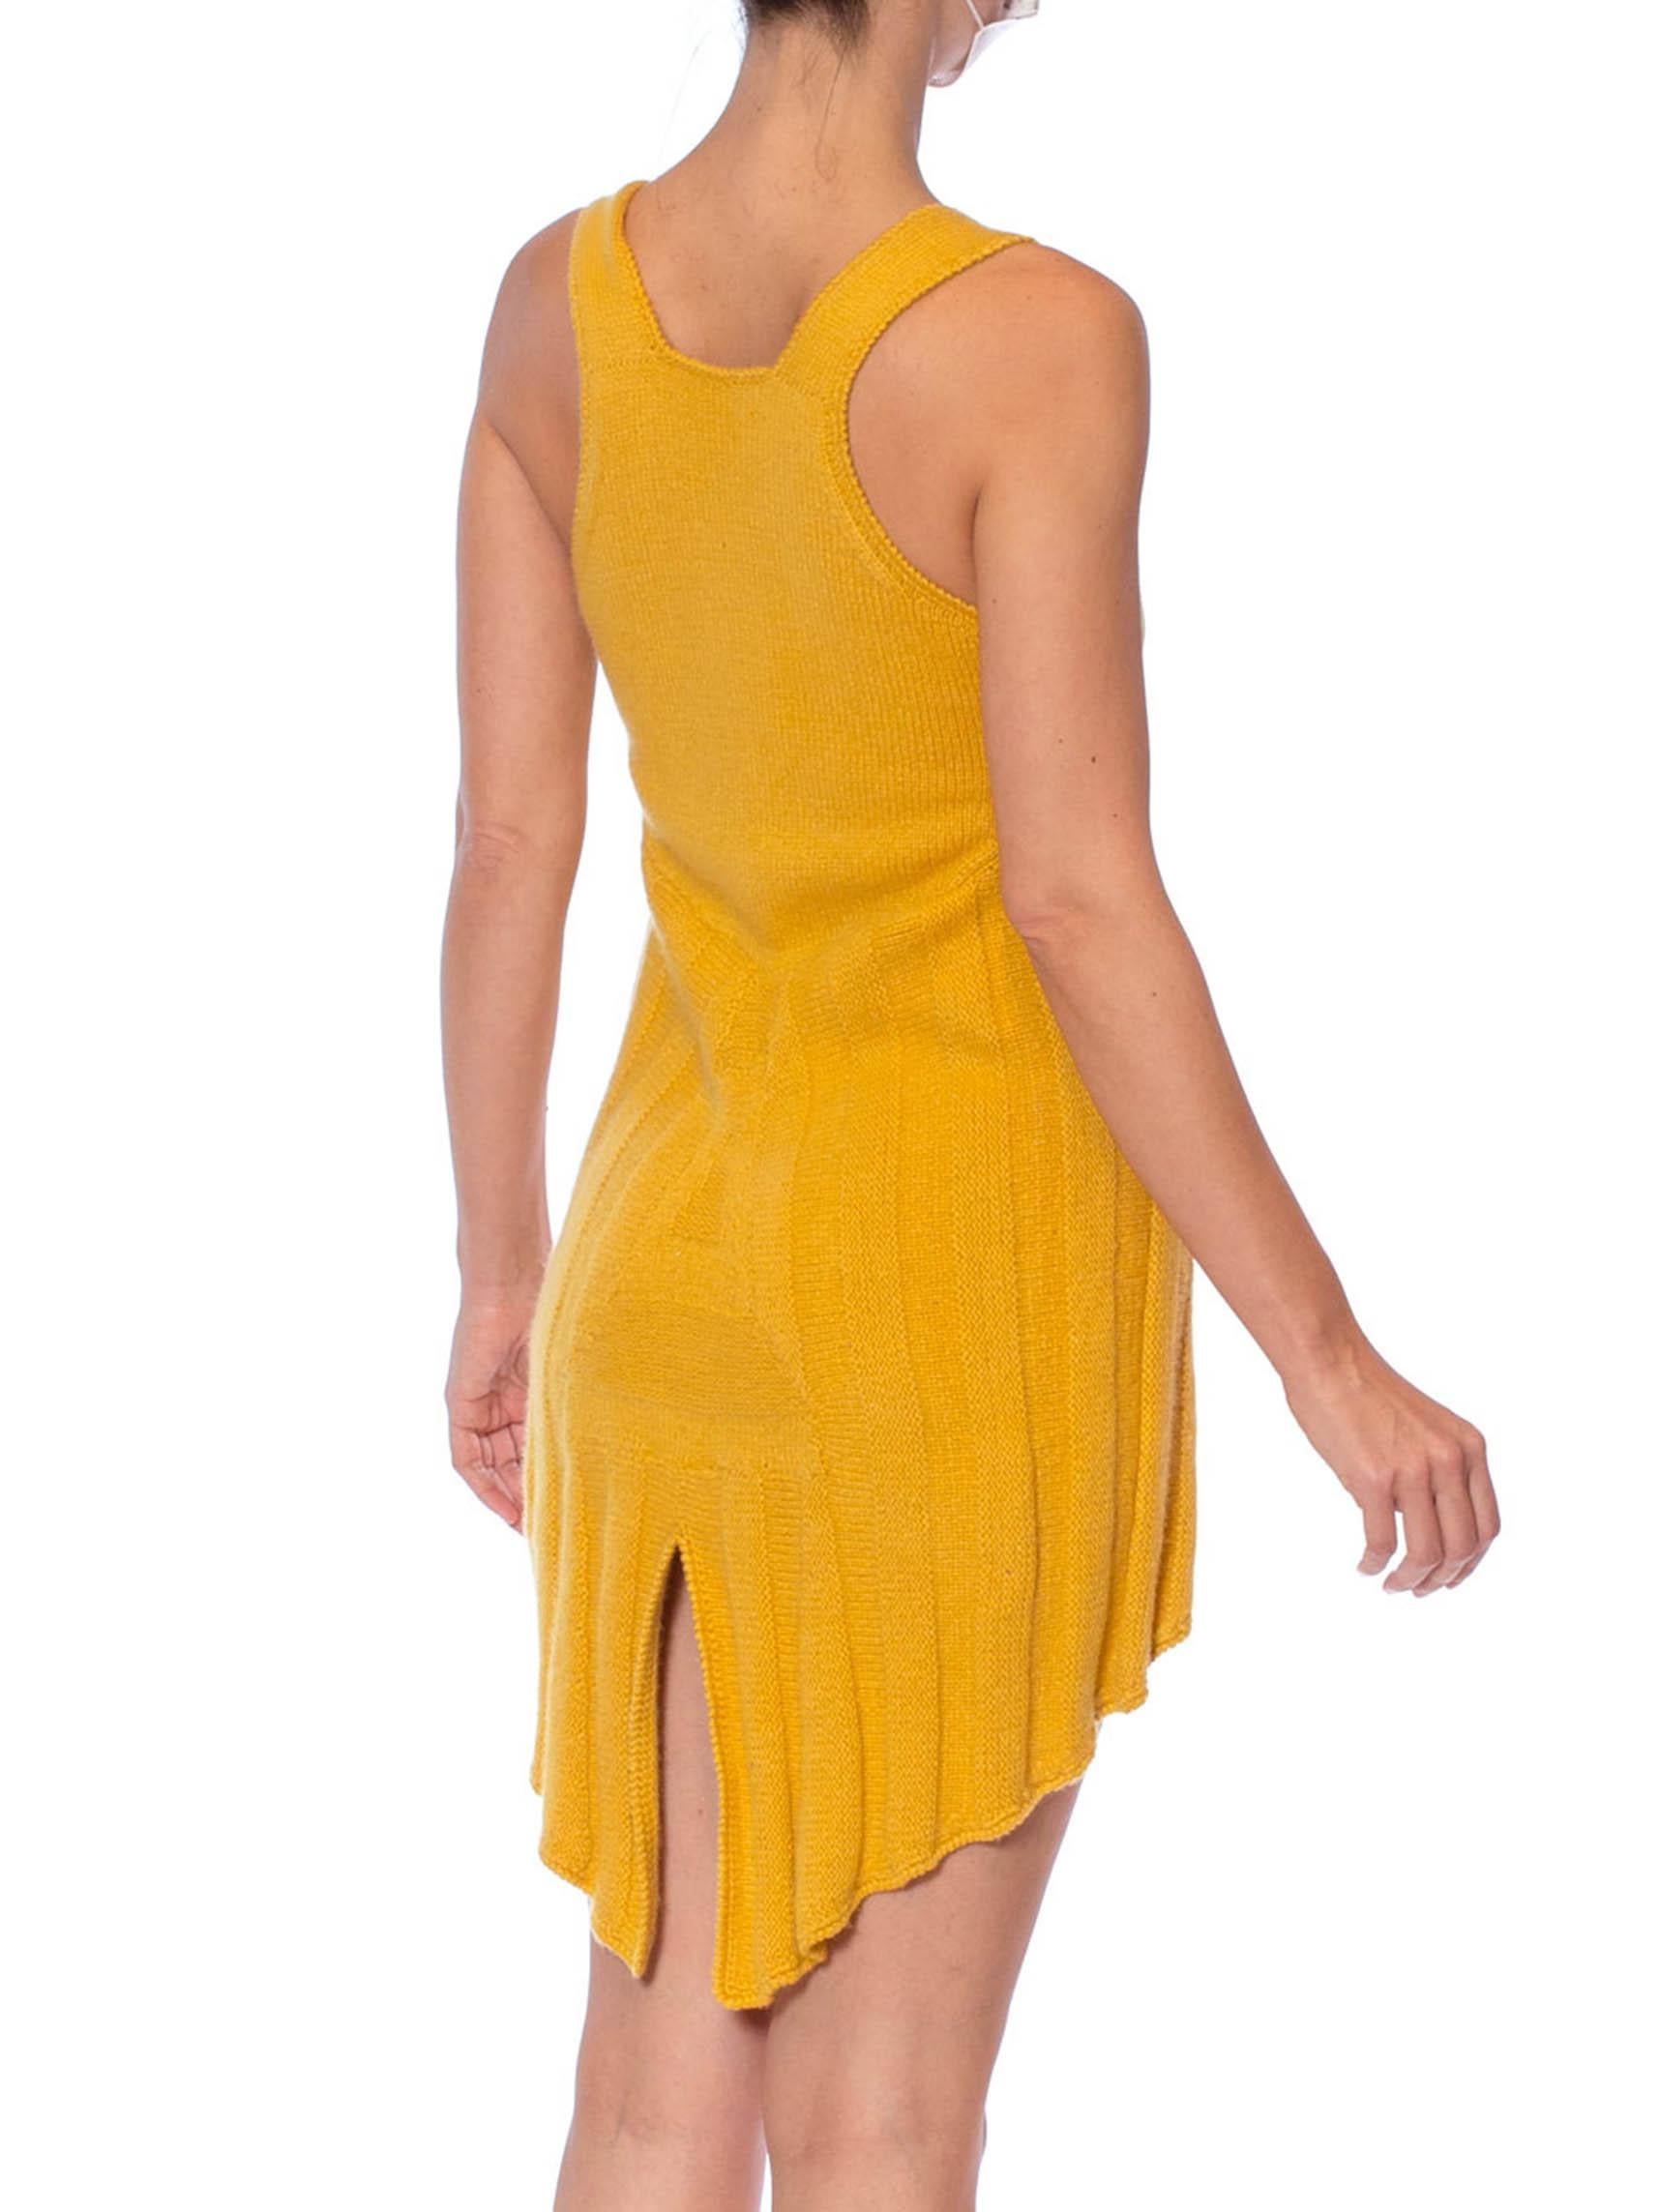 Women's 1970S PACO RABANNE Attributed Mustard Yellow Cashmere Blend Knit Sexy Cut-Out D For Sale